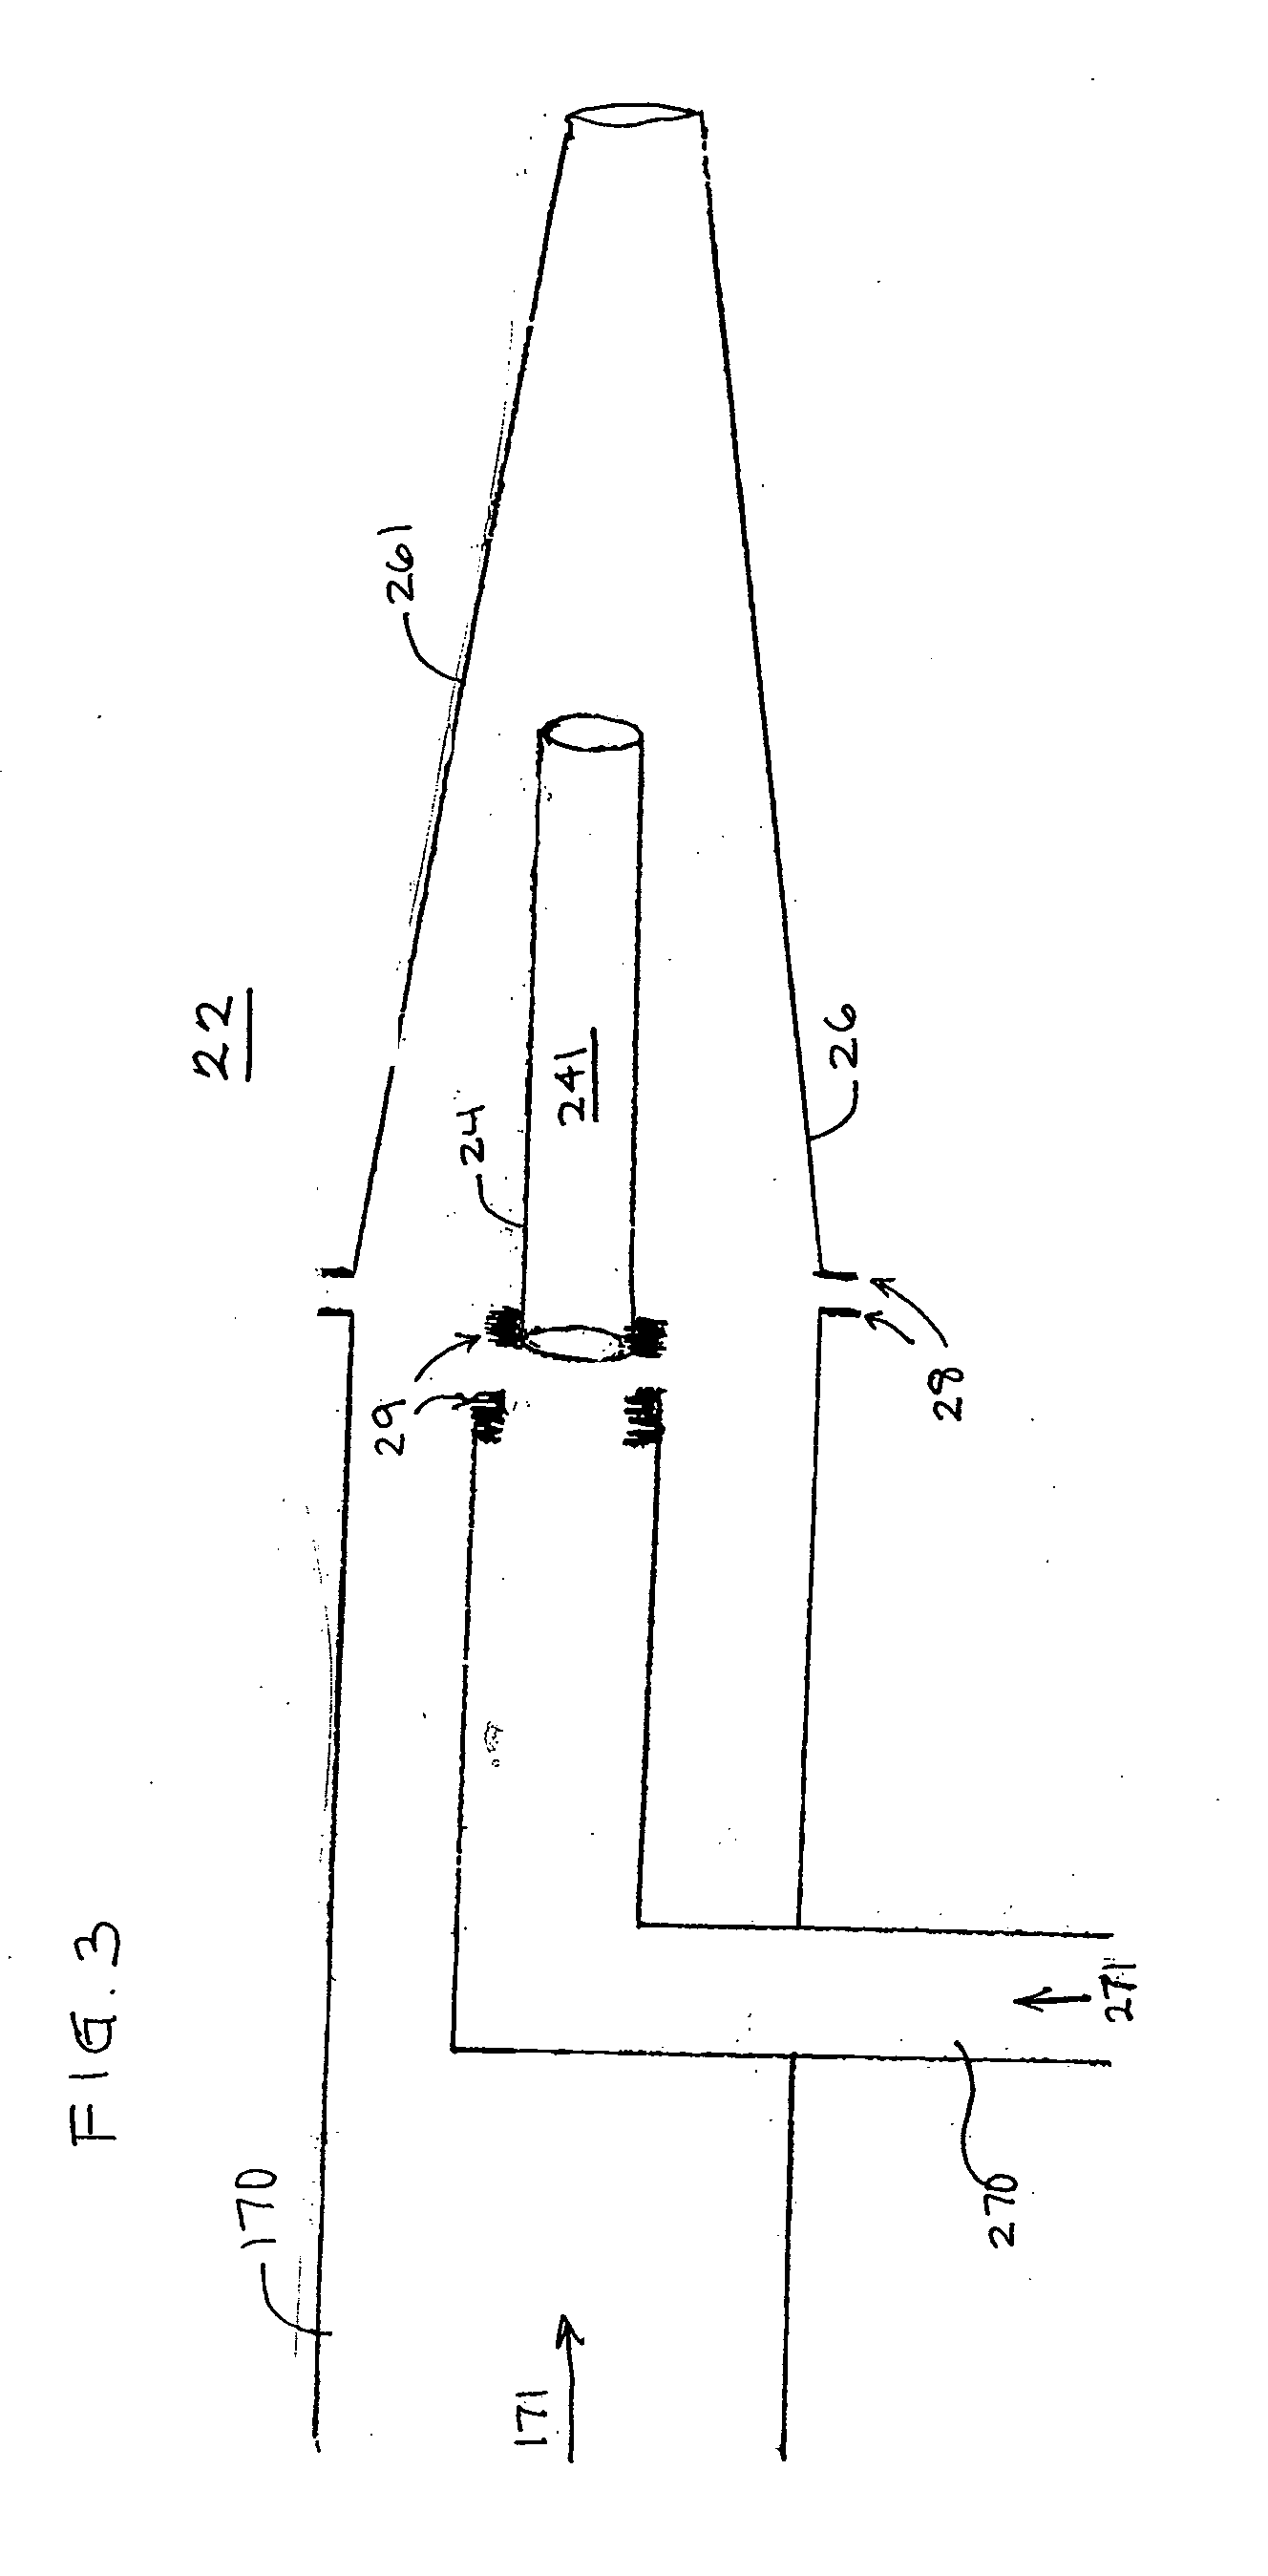 Method and apparatus for extruding filled doughs